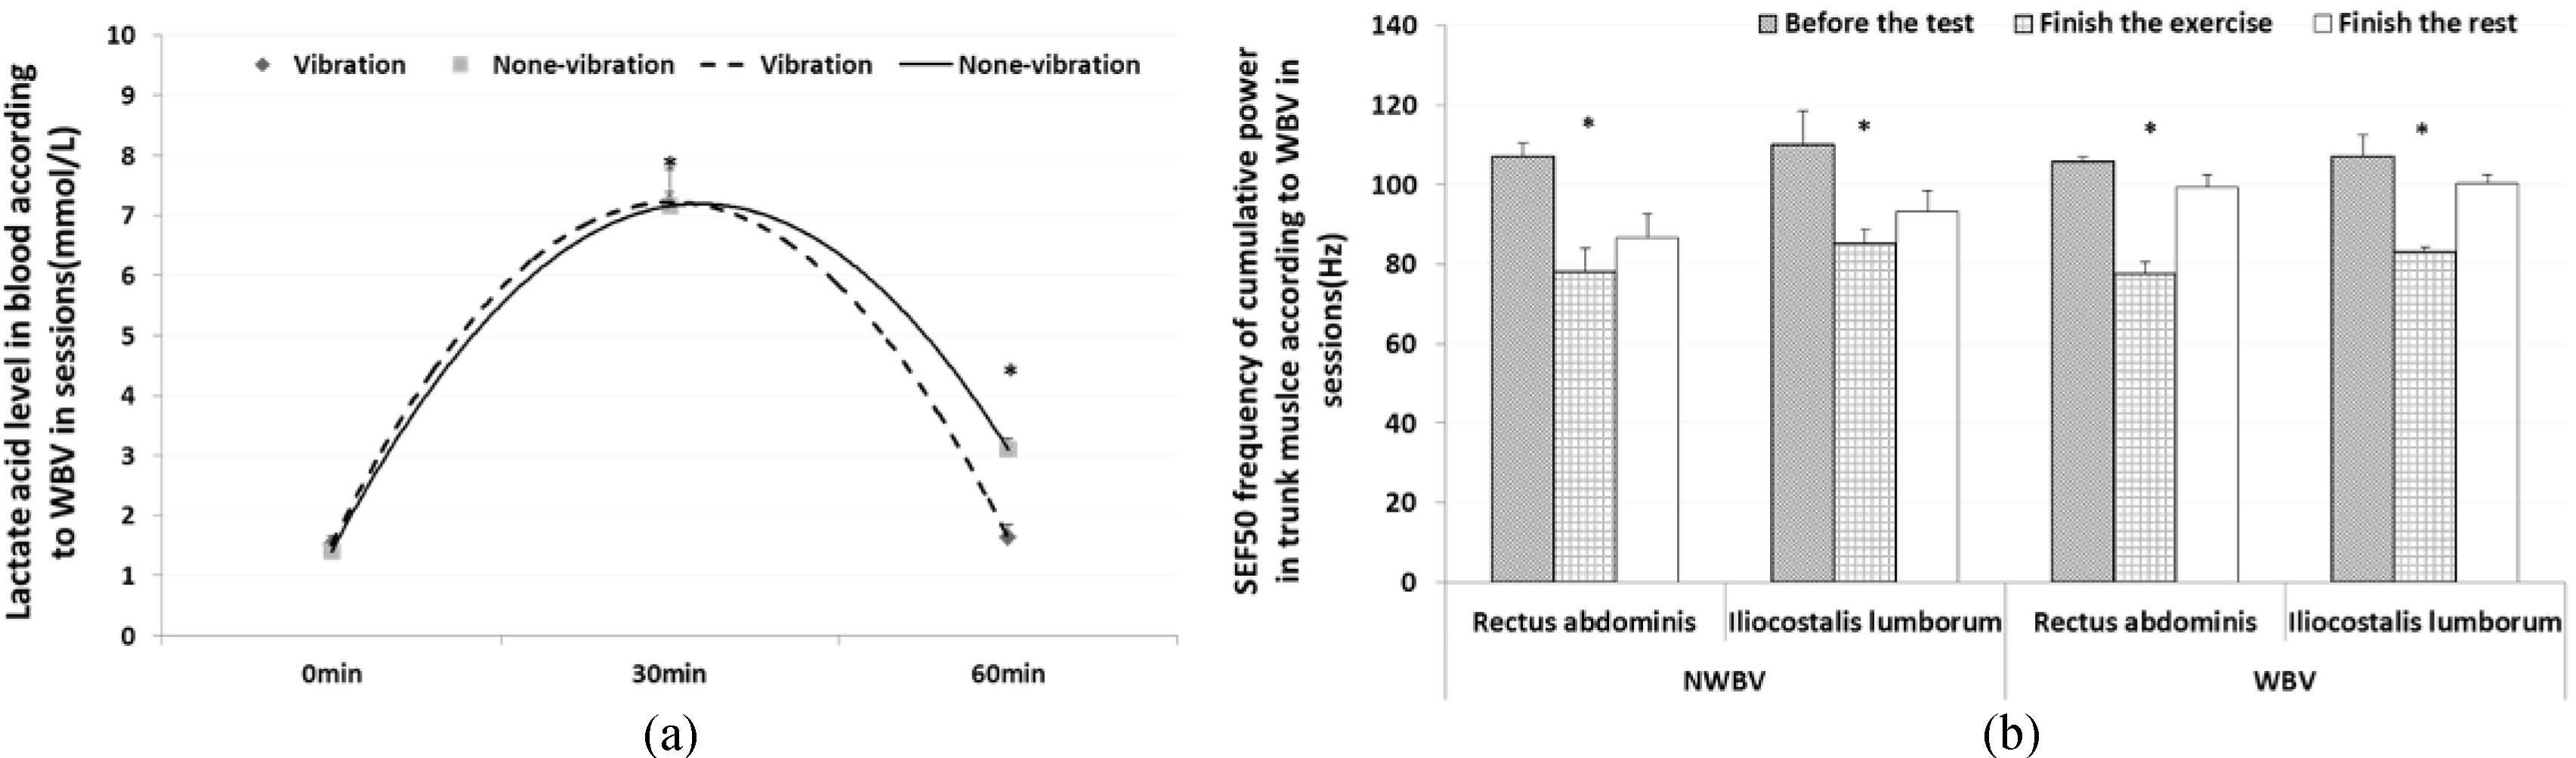 (a) Variation in blood lactate levels according to WBV between groups (mean ± SD, *p< 0.05), (b) Results of SEF 50 frequency of cumulative power for observing muscle fatigue in trunk muscles according to WBV (mean ± SD, *p< 0.05).